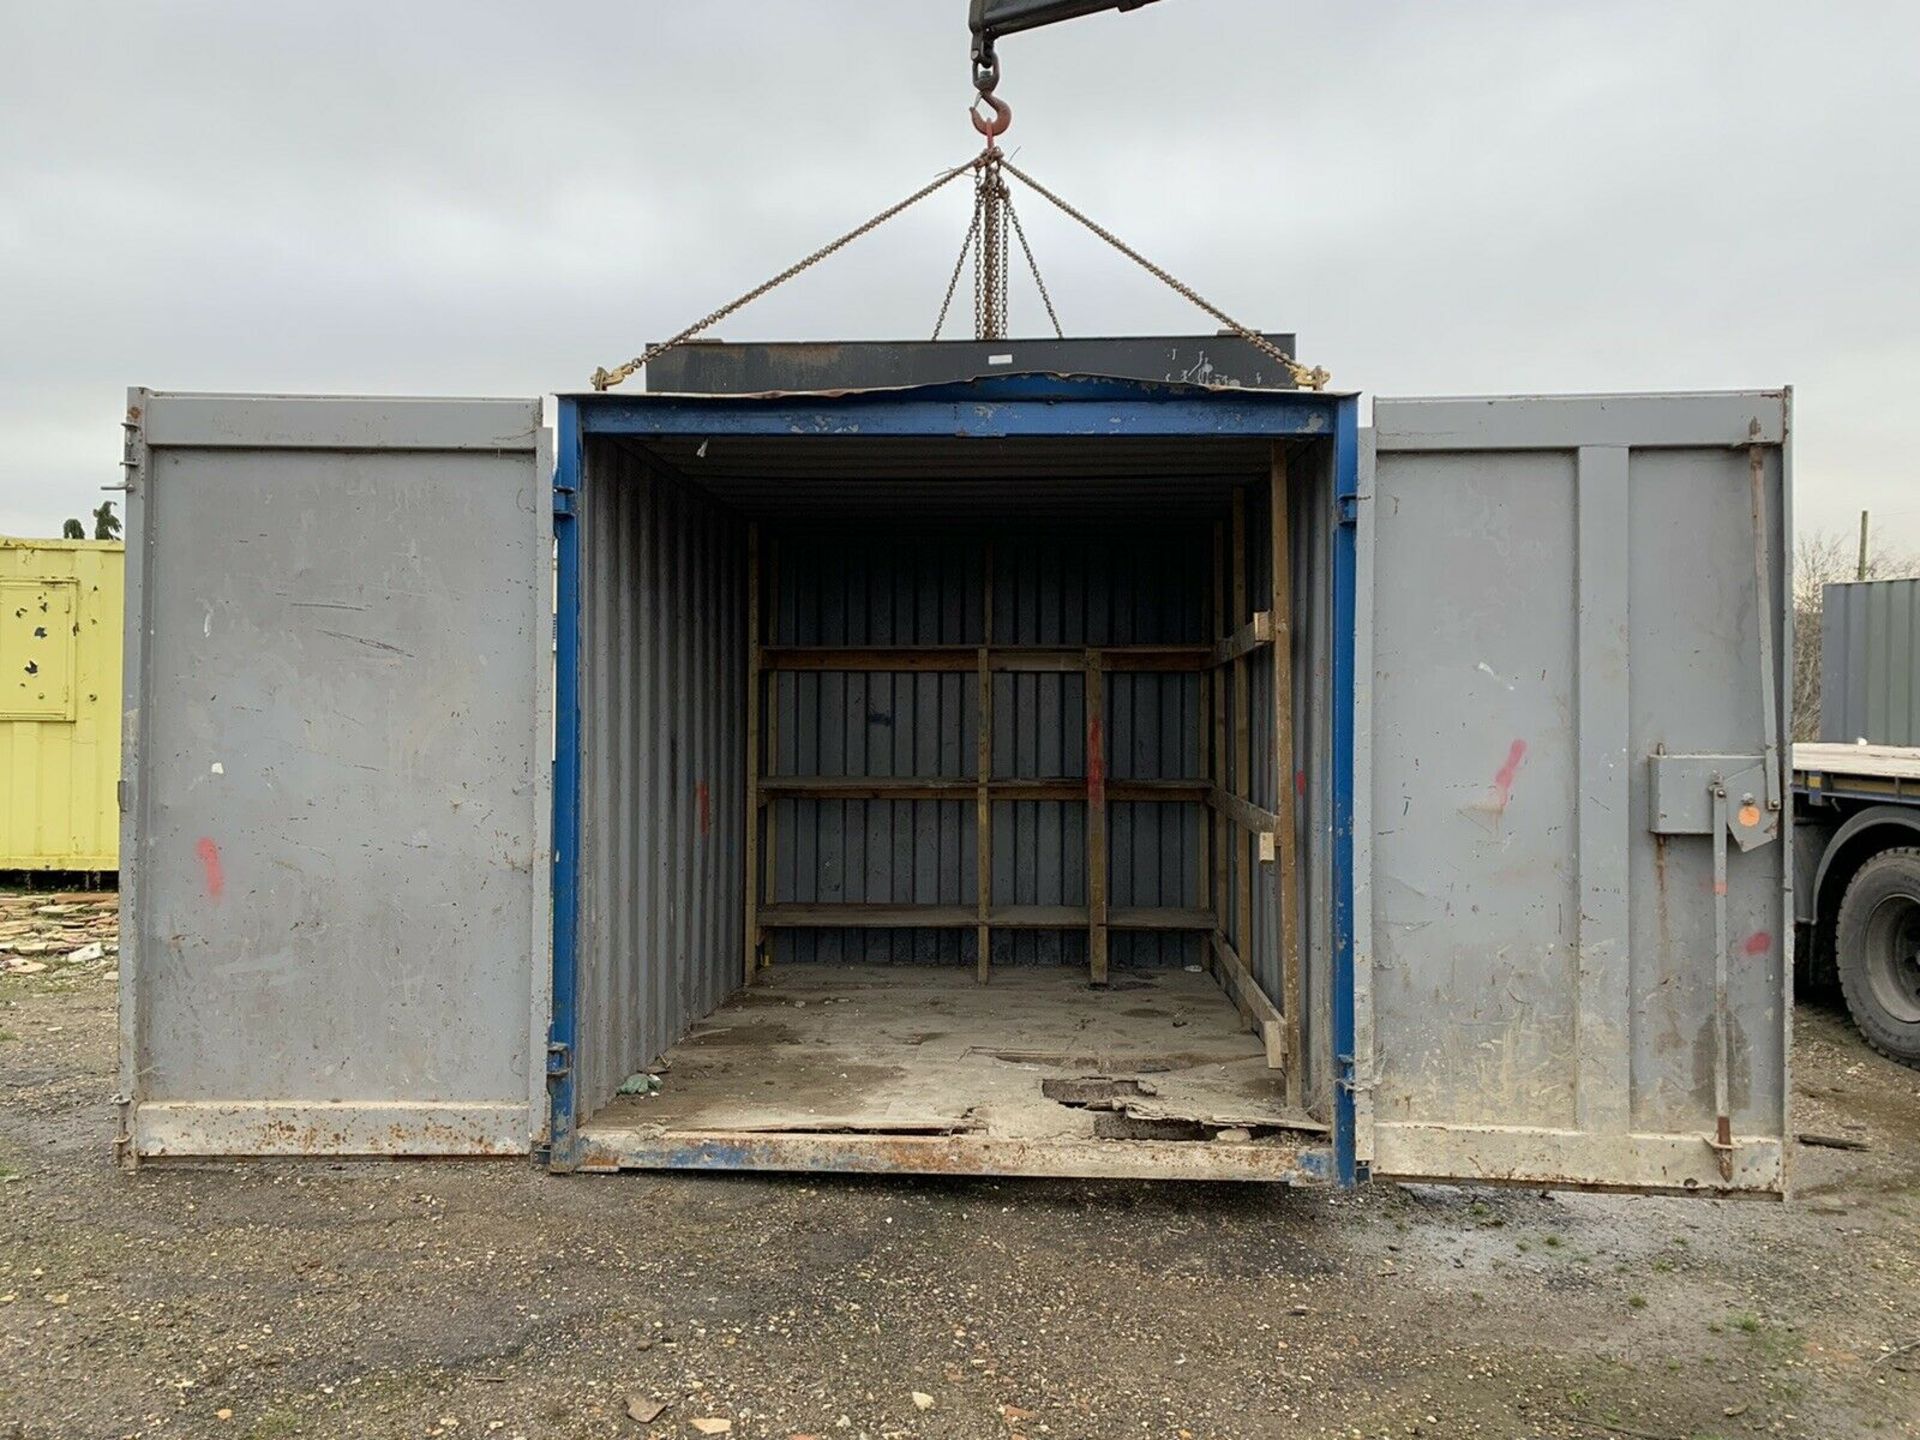 Office / Storage Container Anti Vandal Steel Portable Building 20ft x 8ft - Image 3 of 11